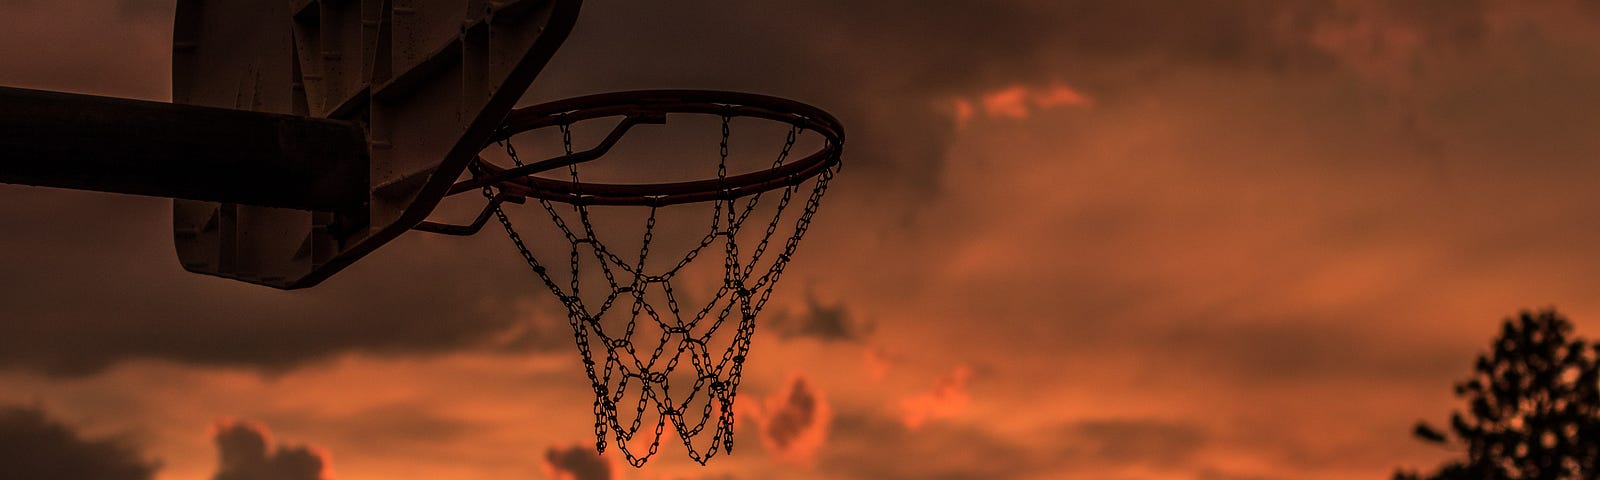 An outdoor basketball hoop shown with the sun setting.